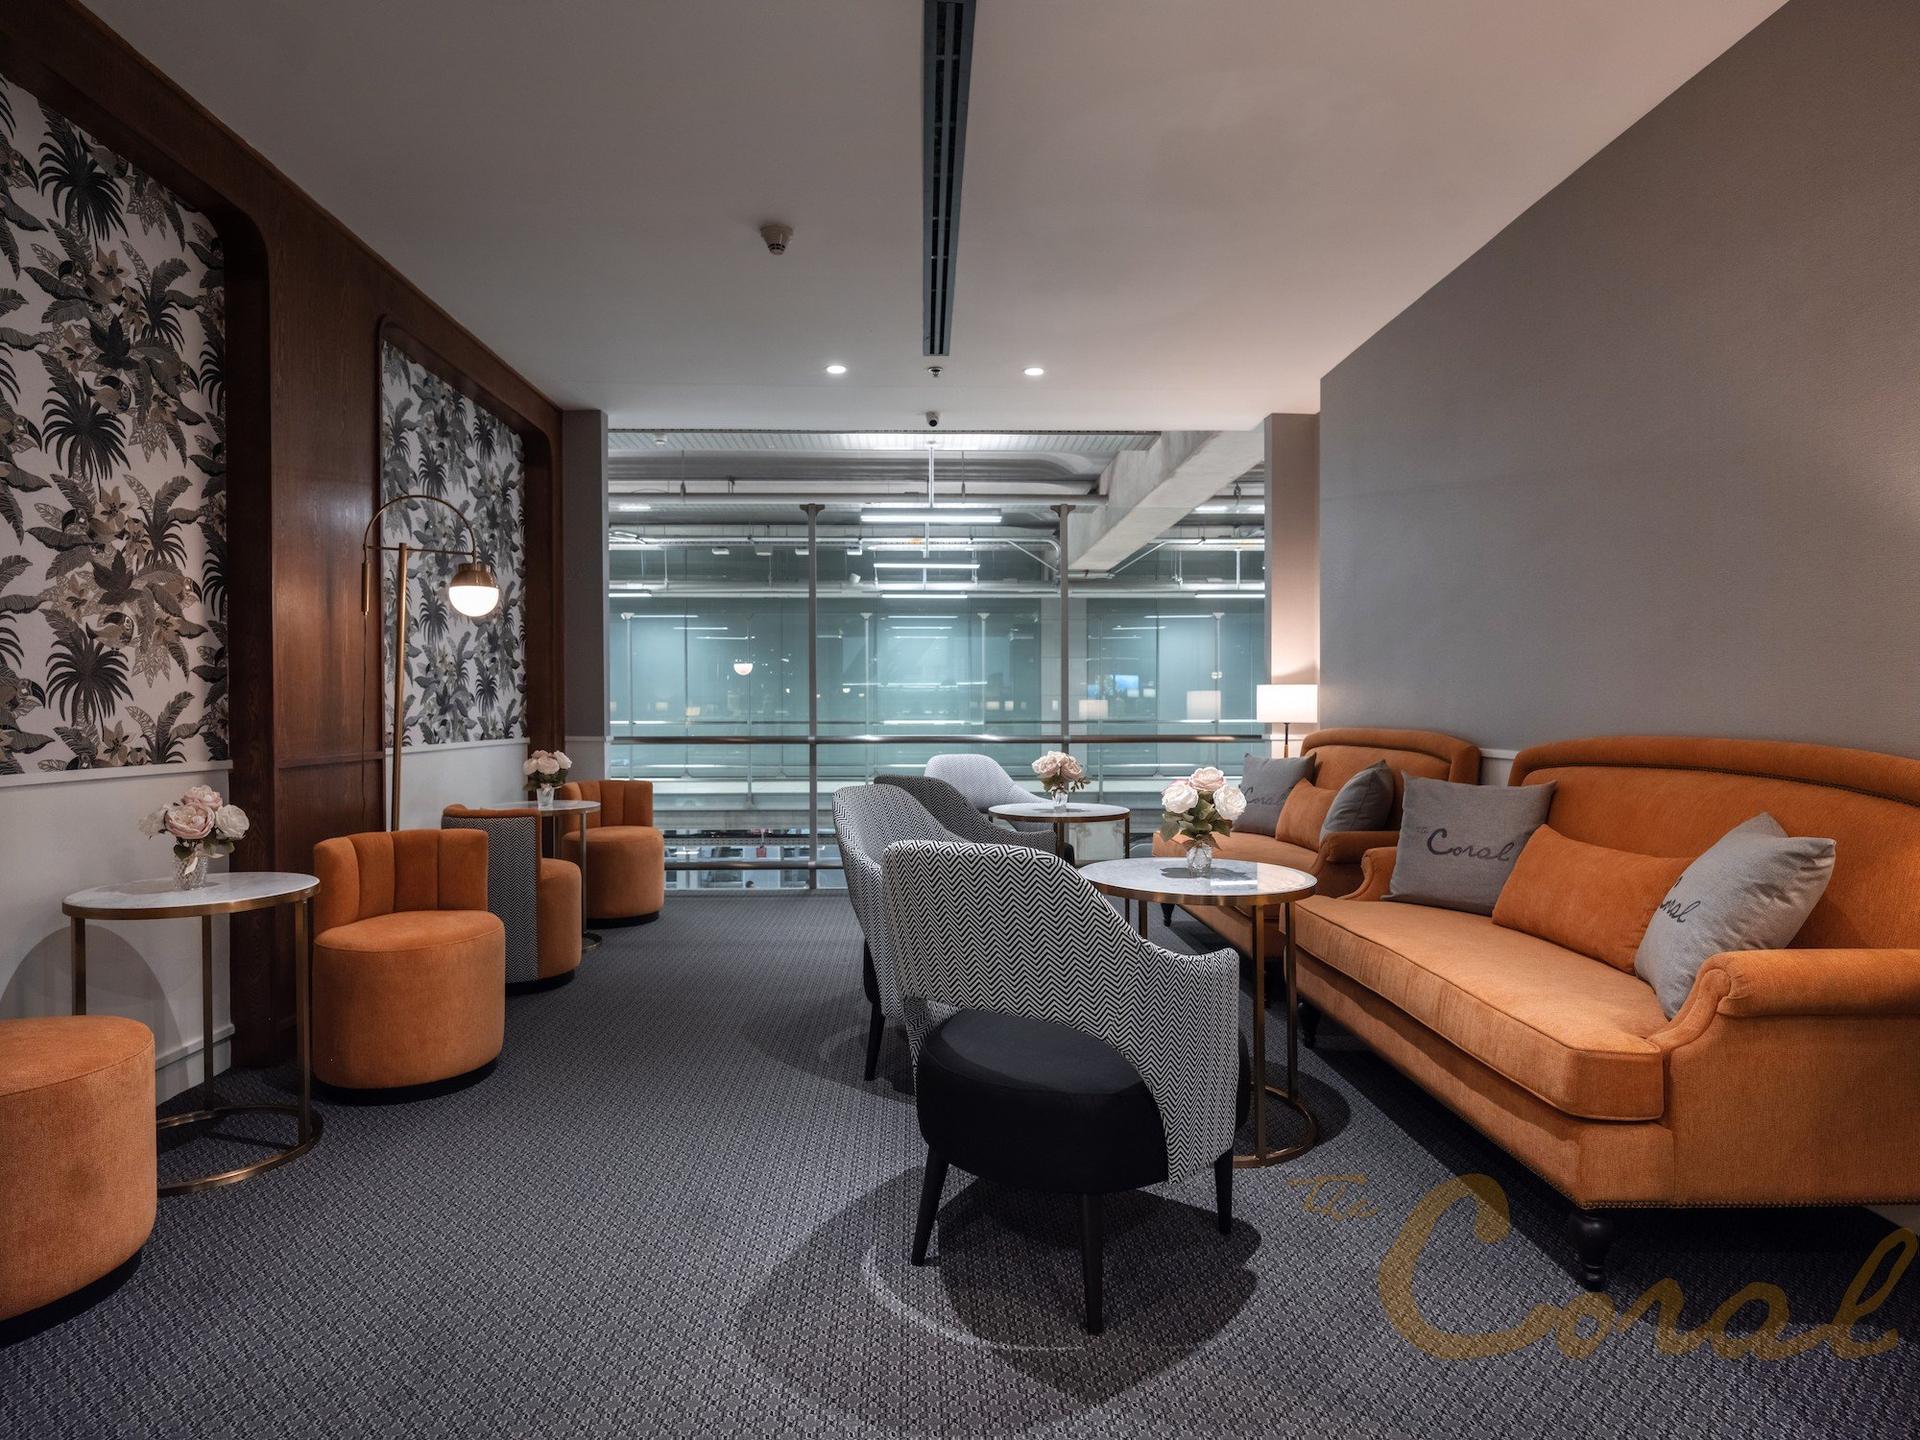 The Coral Finest Business Class Lounge image 9 of 15